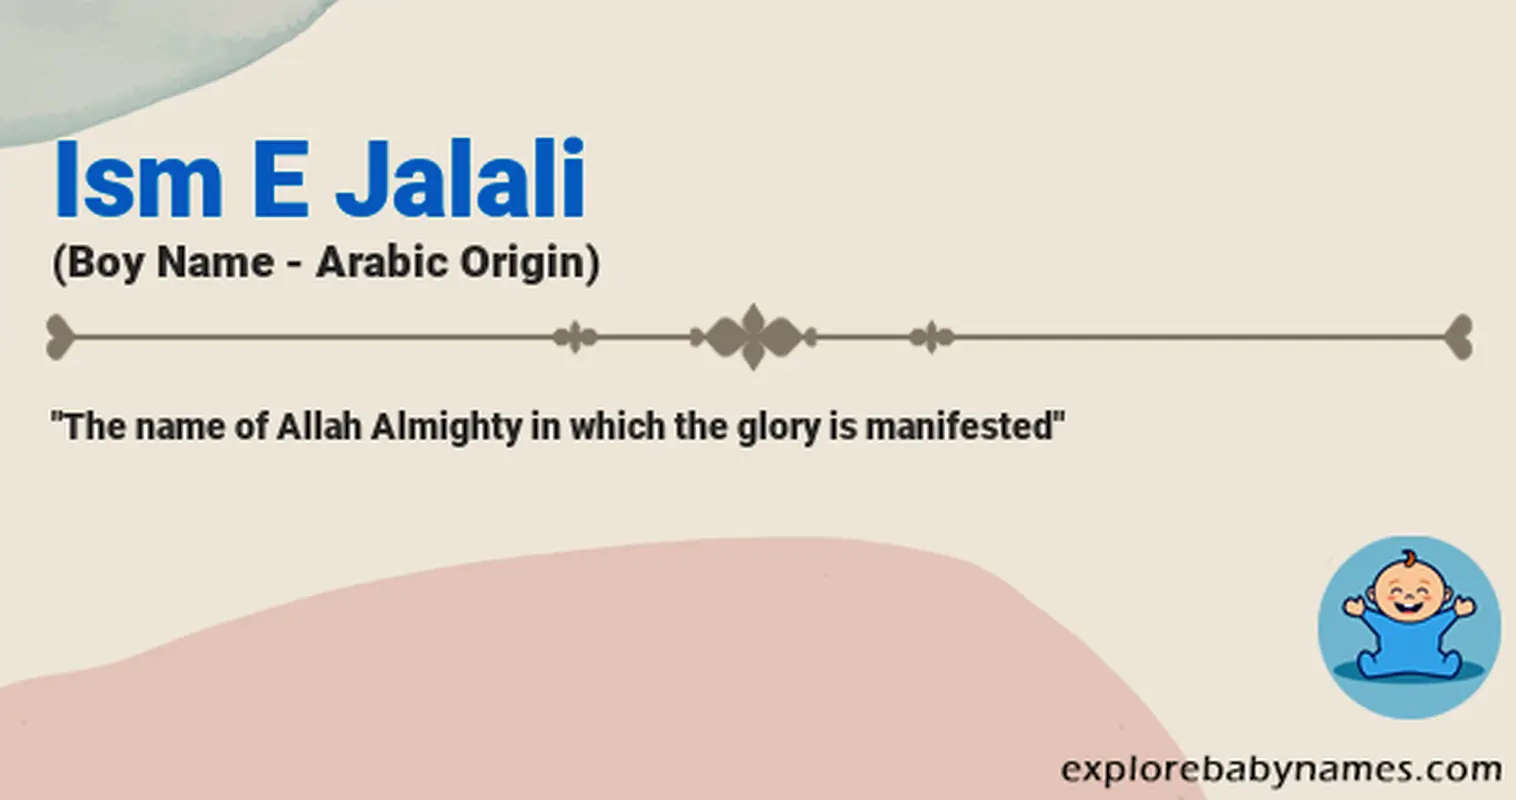 Meaning of Ism E Jalali